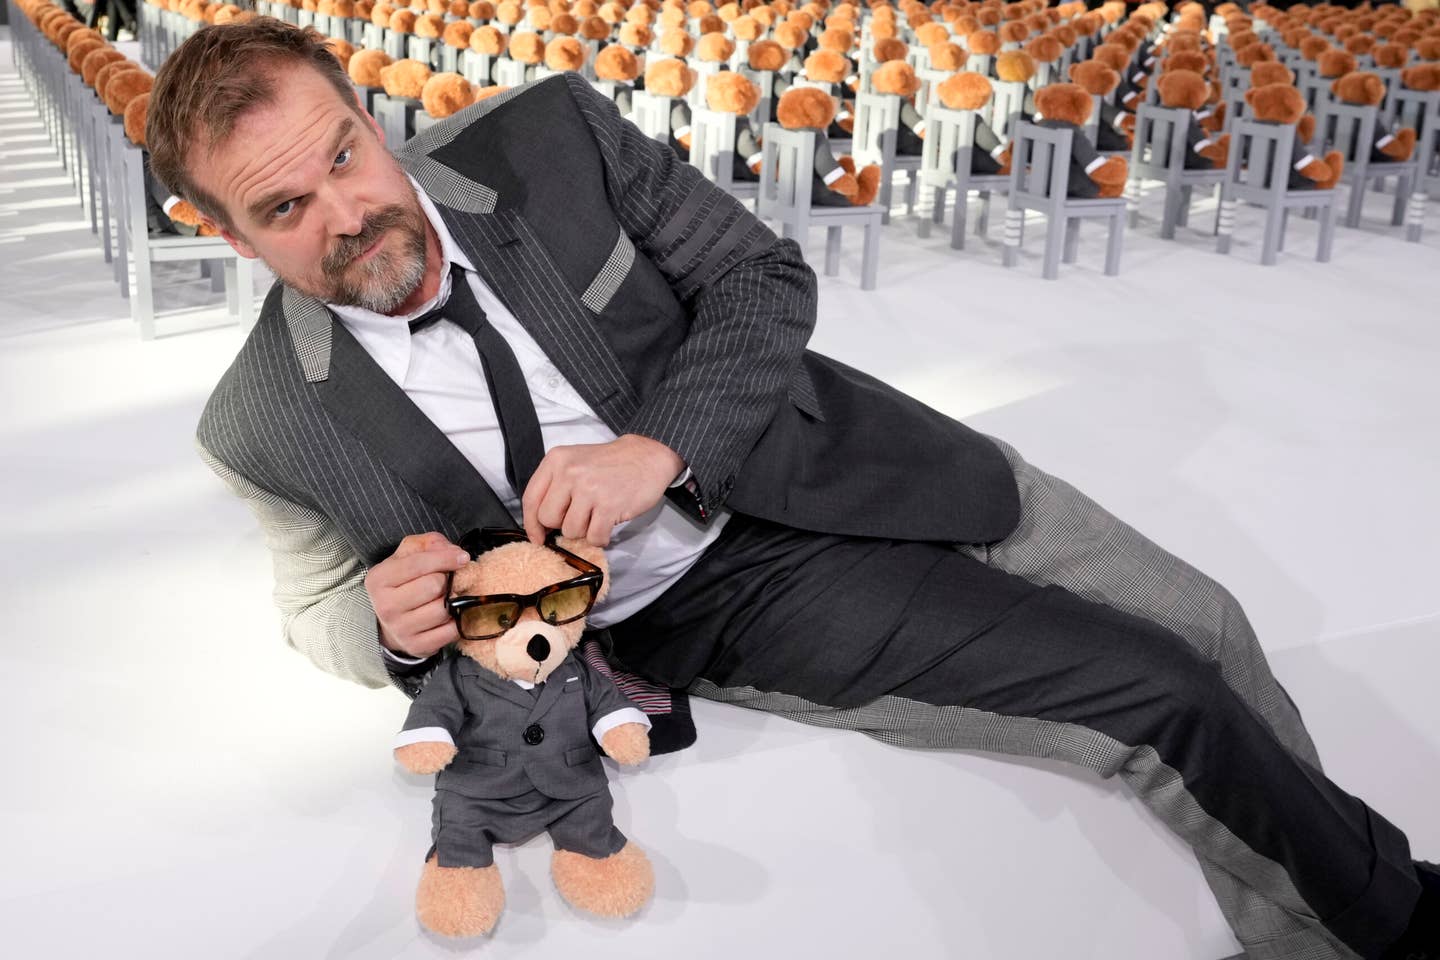 David Harbour attends the Thom Browne Fall 2022 fashion show at the Javits Center on Friday, April. 29, 2022, in New York. (Photo by Charles Sykes/Invision/AP)